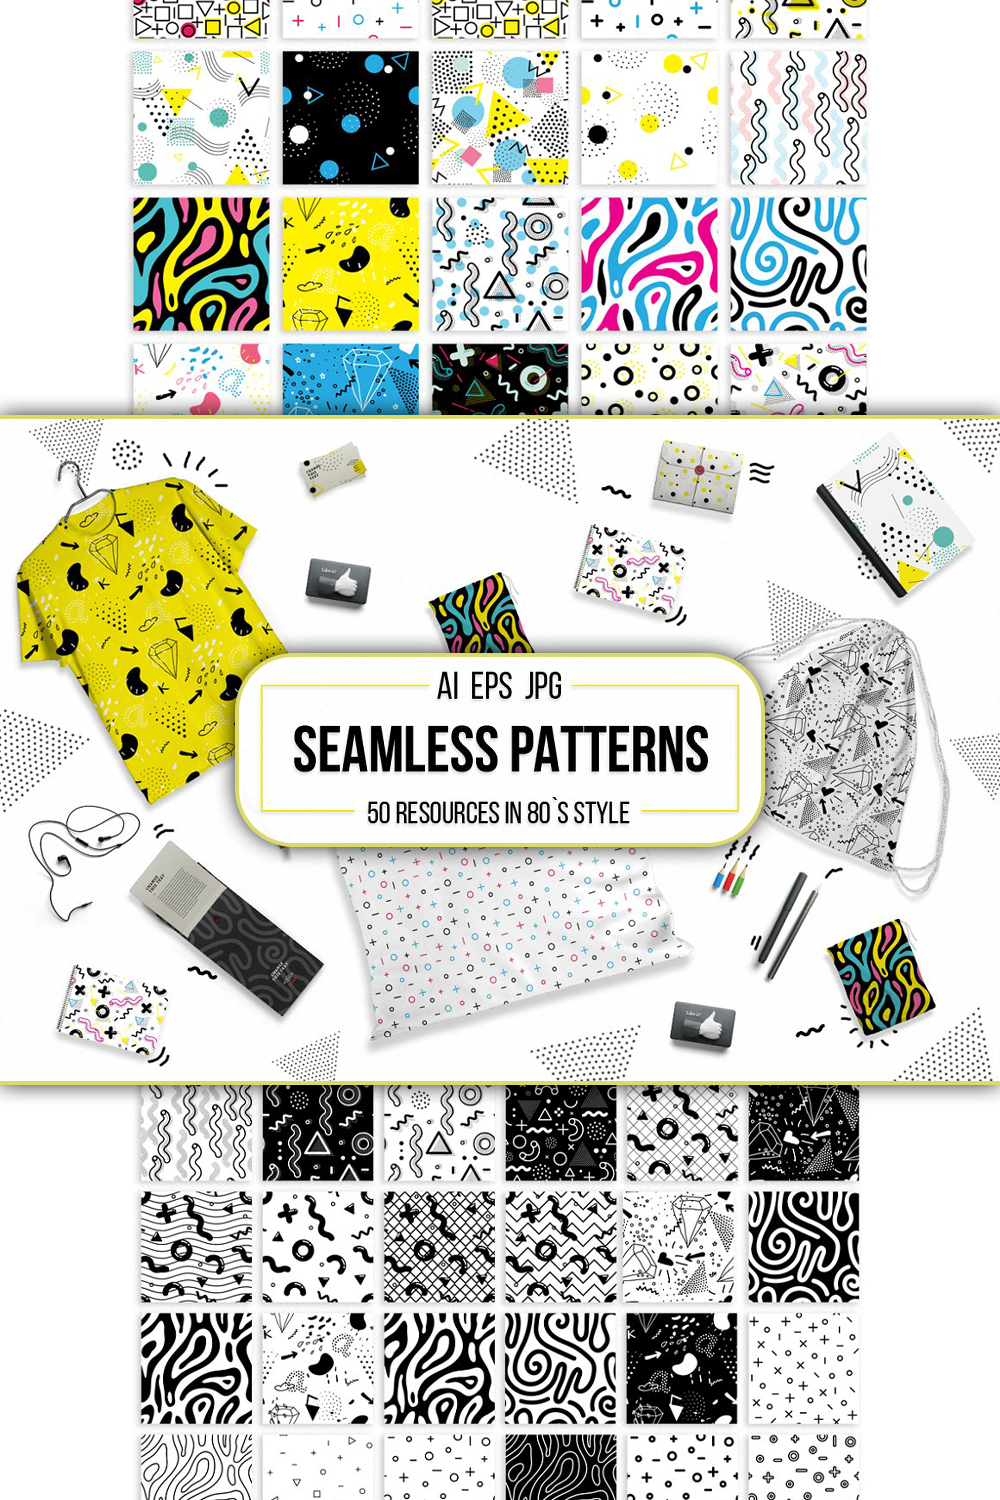 Seamless patterns in 80s style of pinterest.